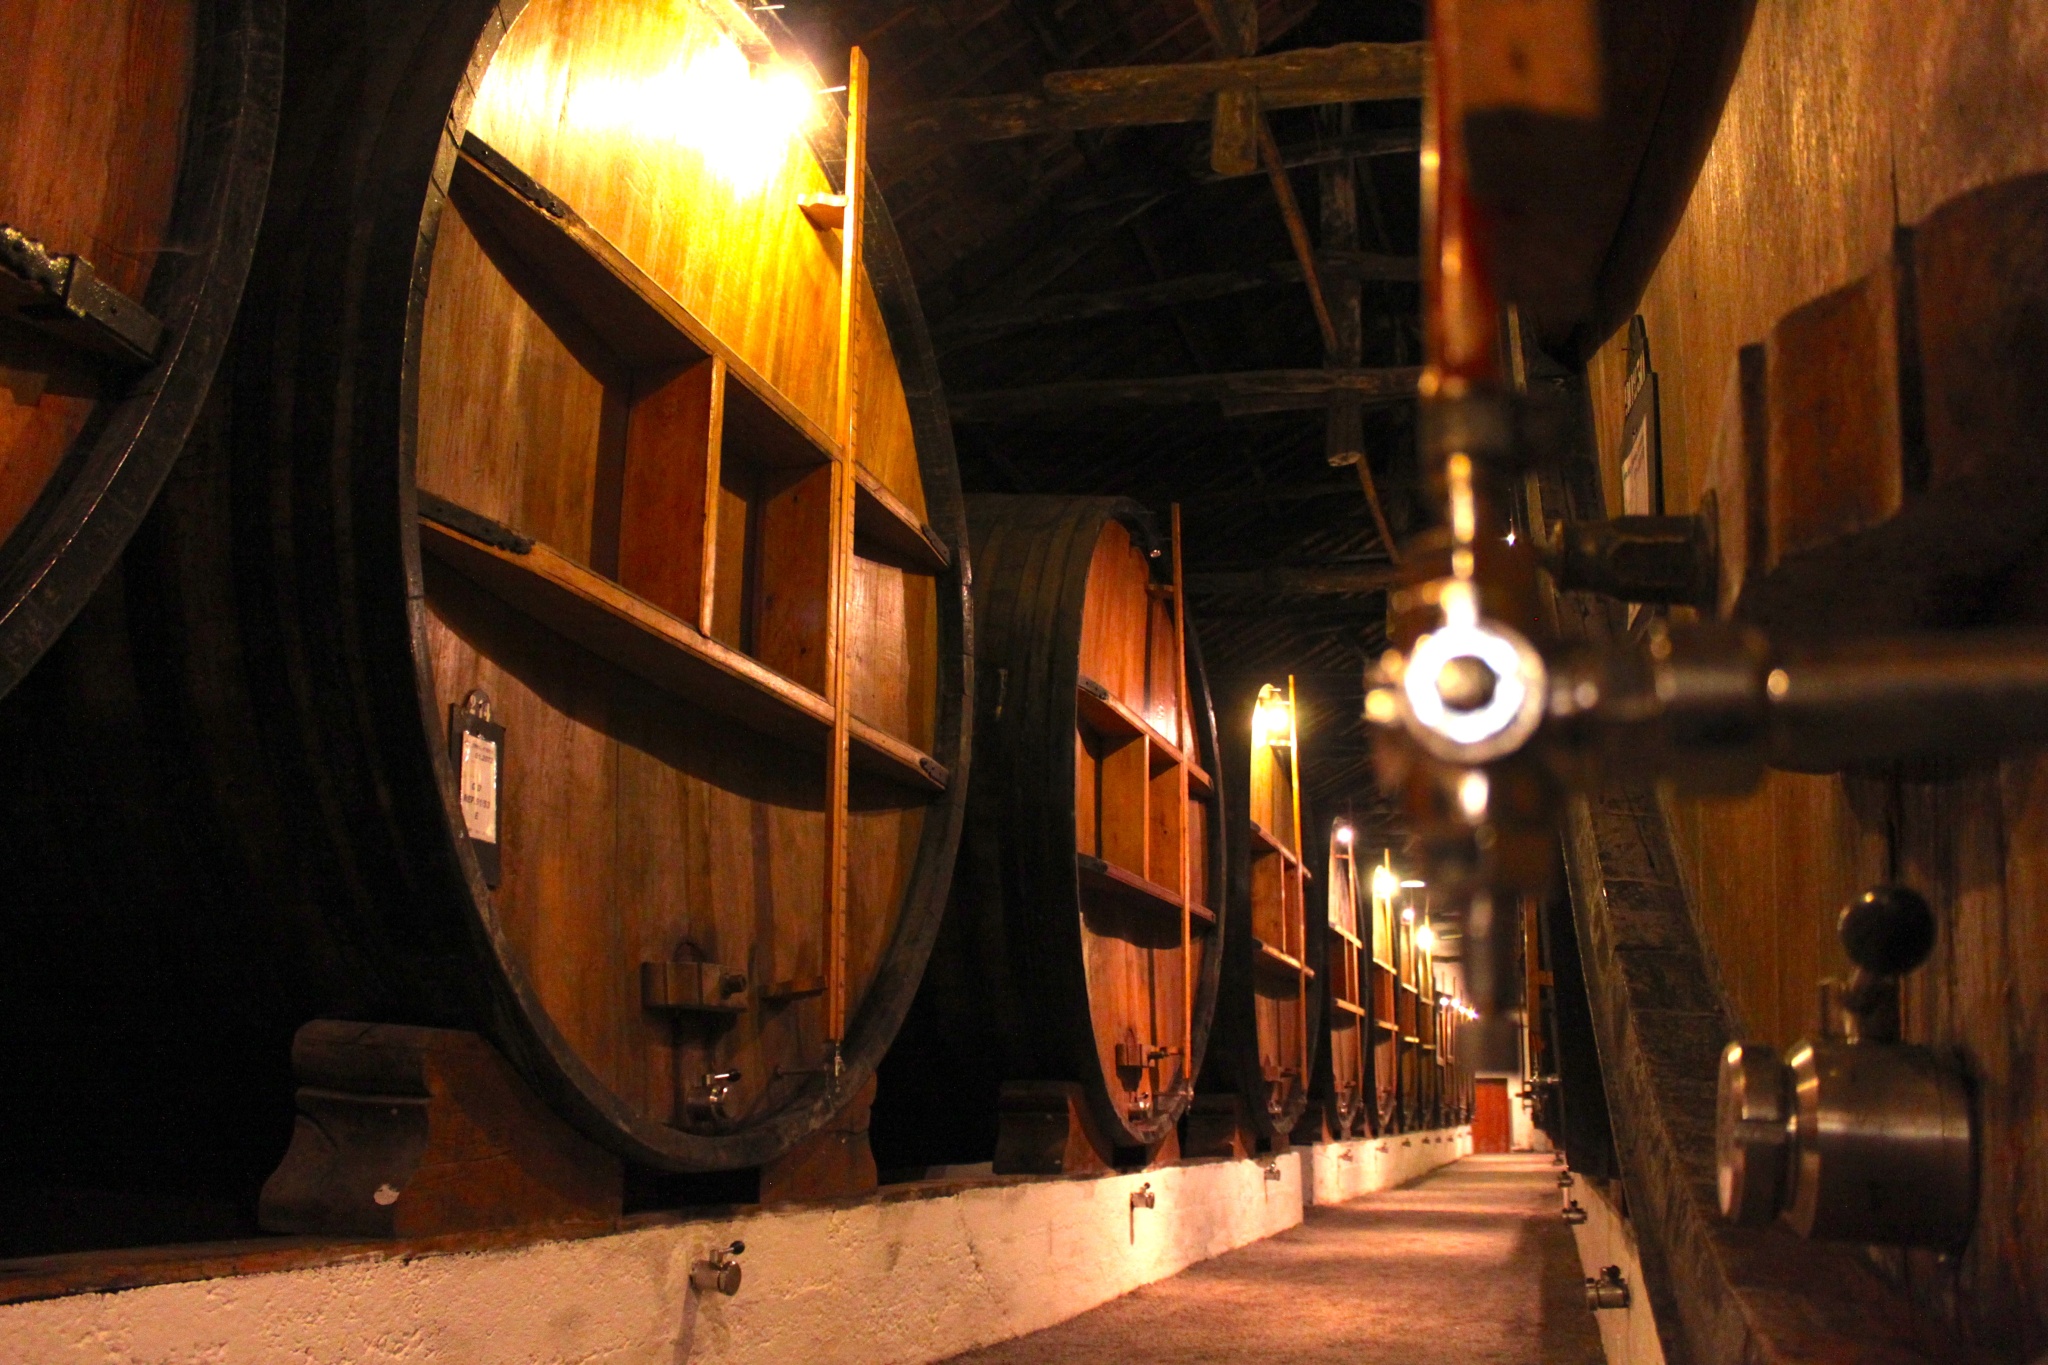 Wine ages in wooden barrels at Taylorâ??s Port Wine in Porto, Portugal.